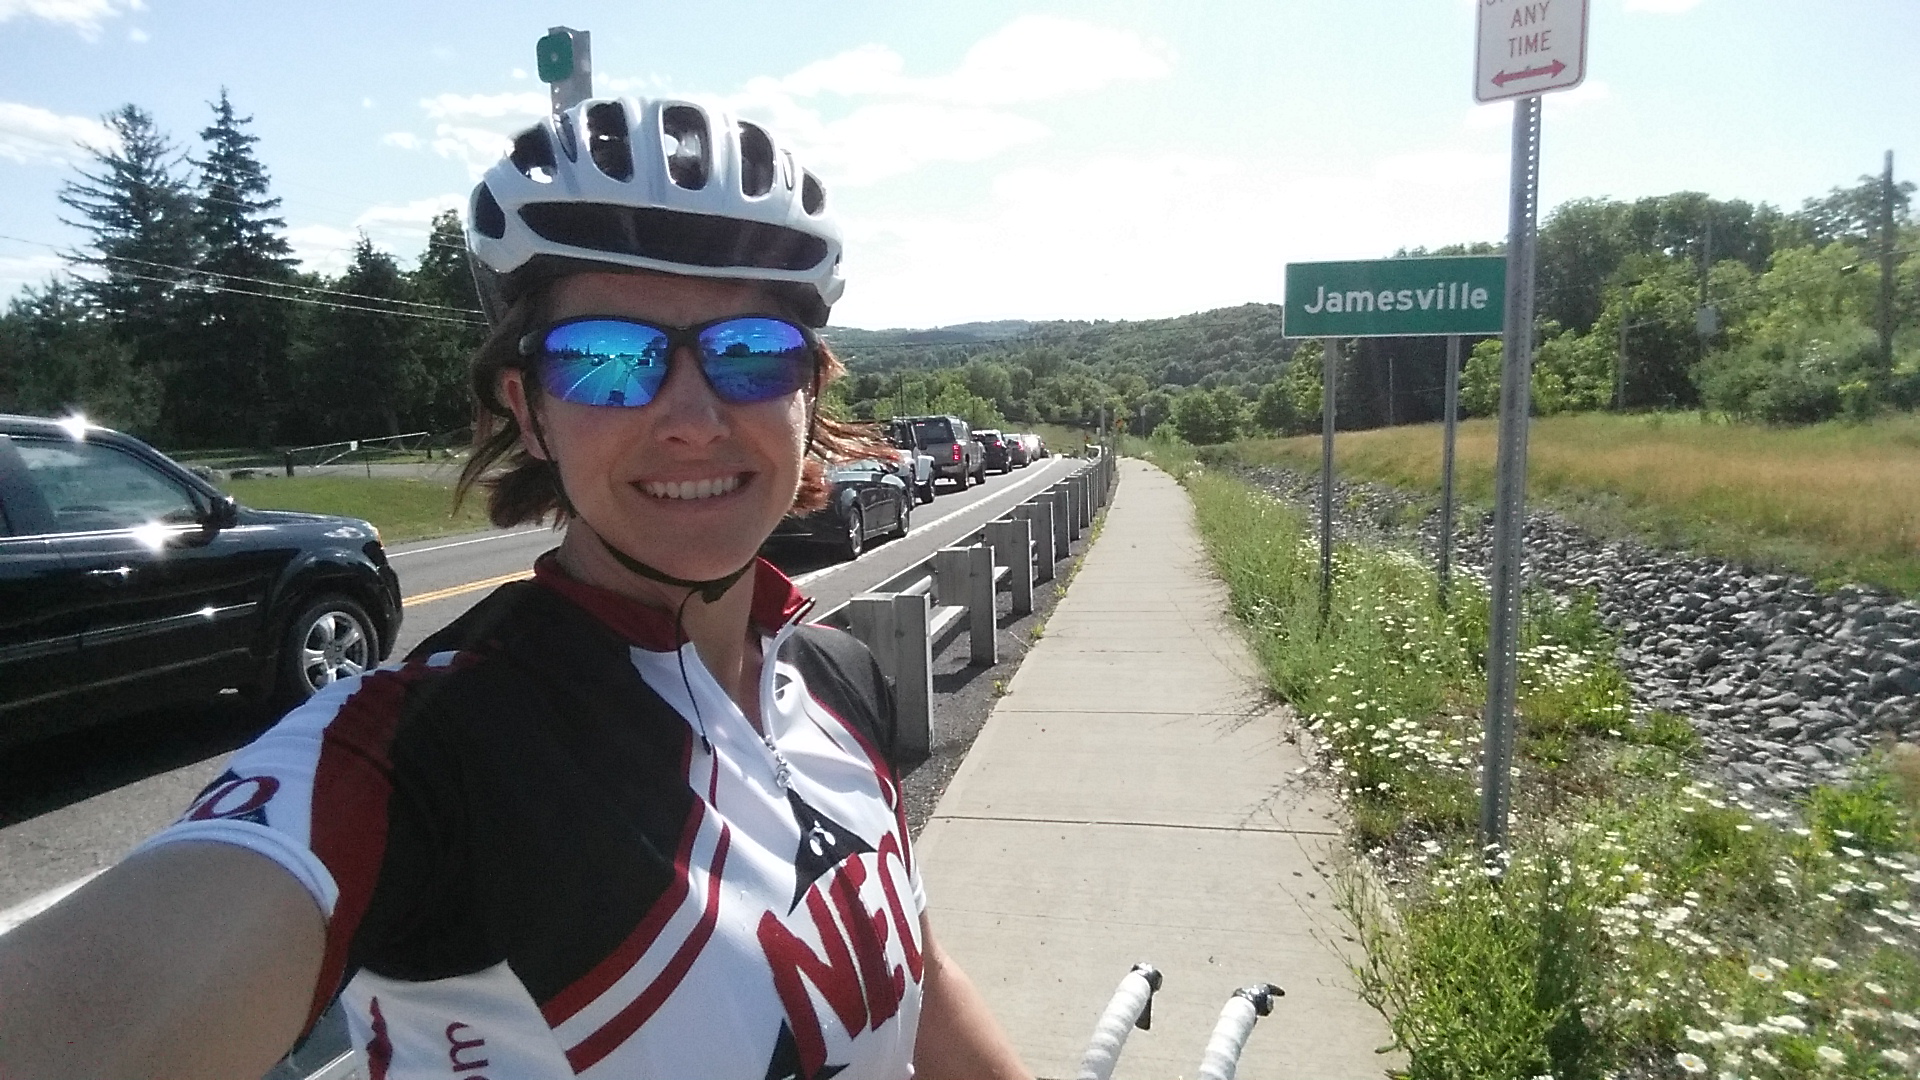 Coach Nicole in Jamesville, NY for the 2016 IRONMAN Syracuse 70.3